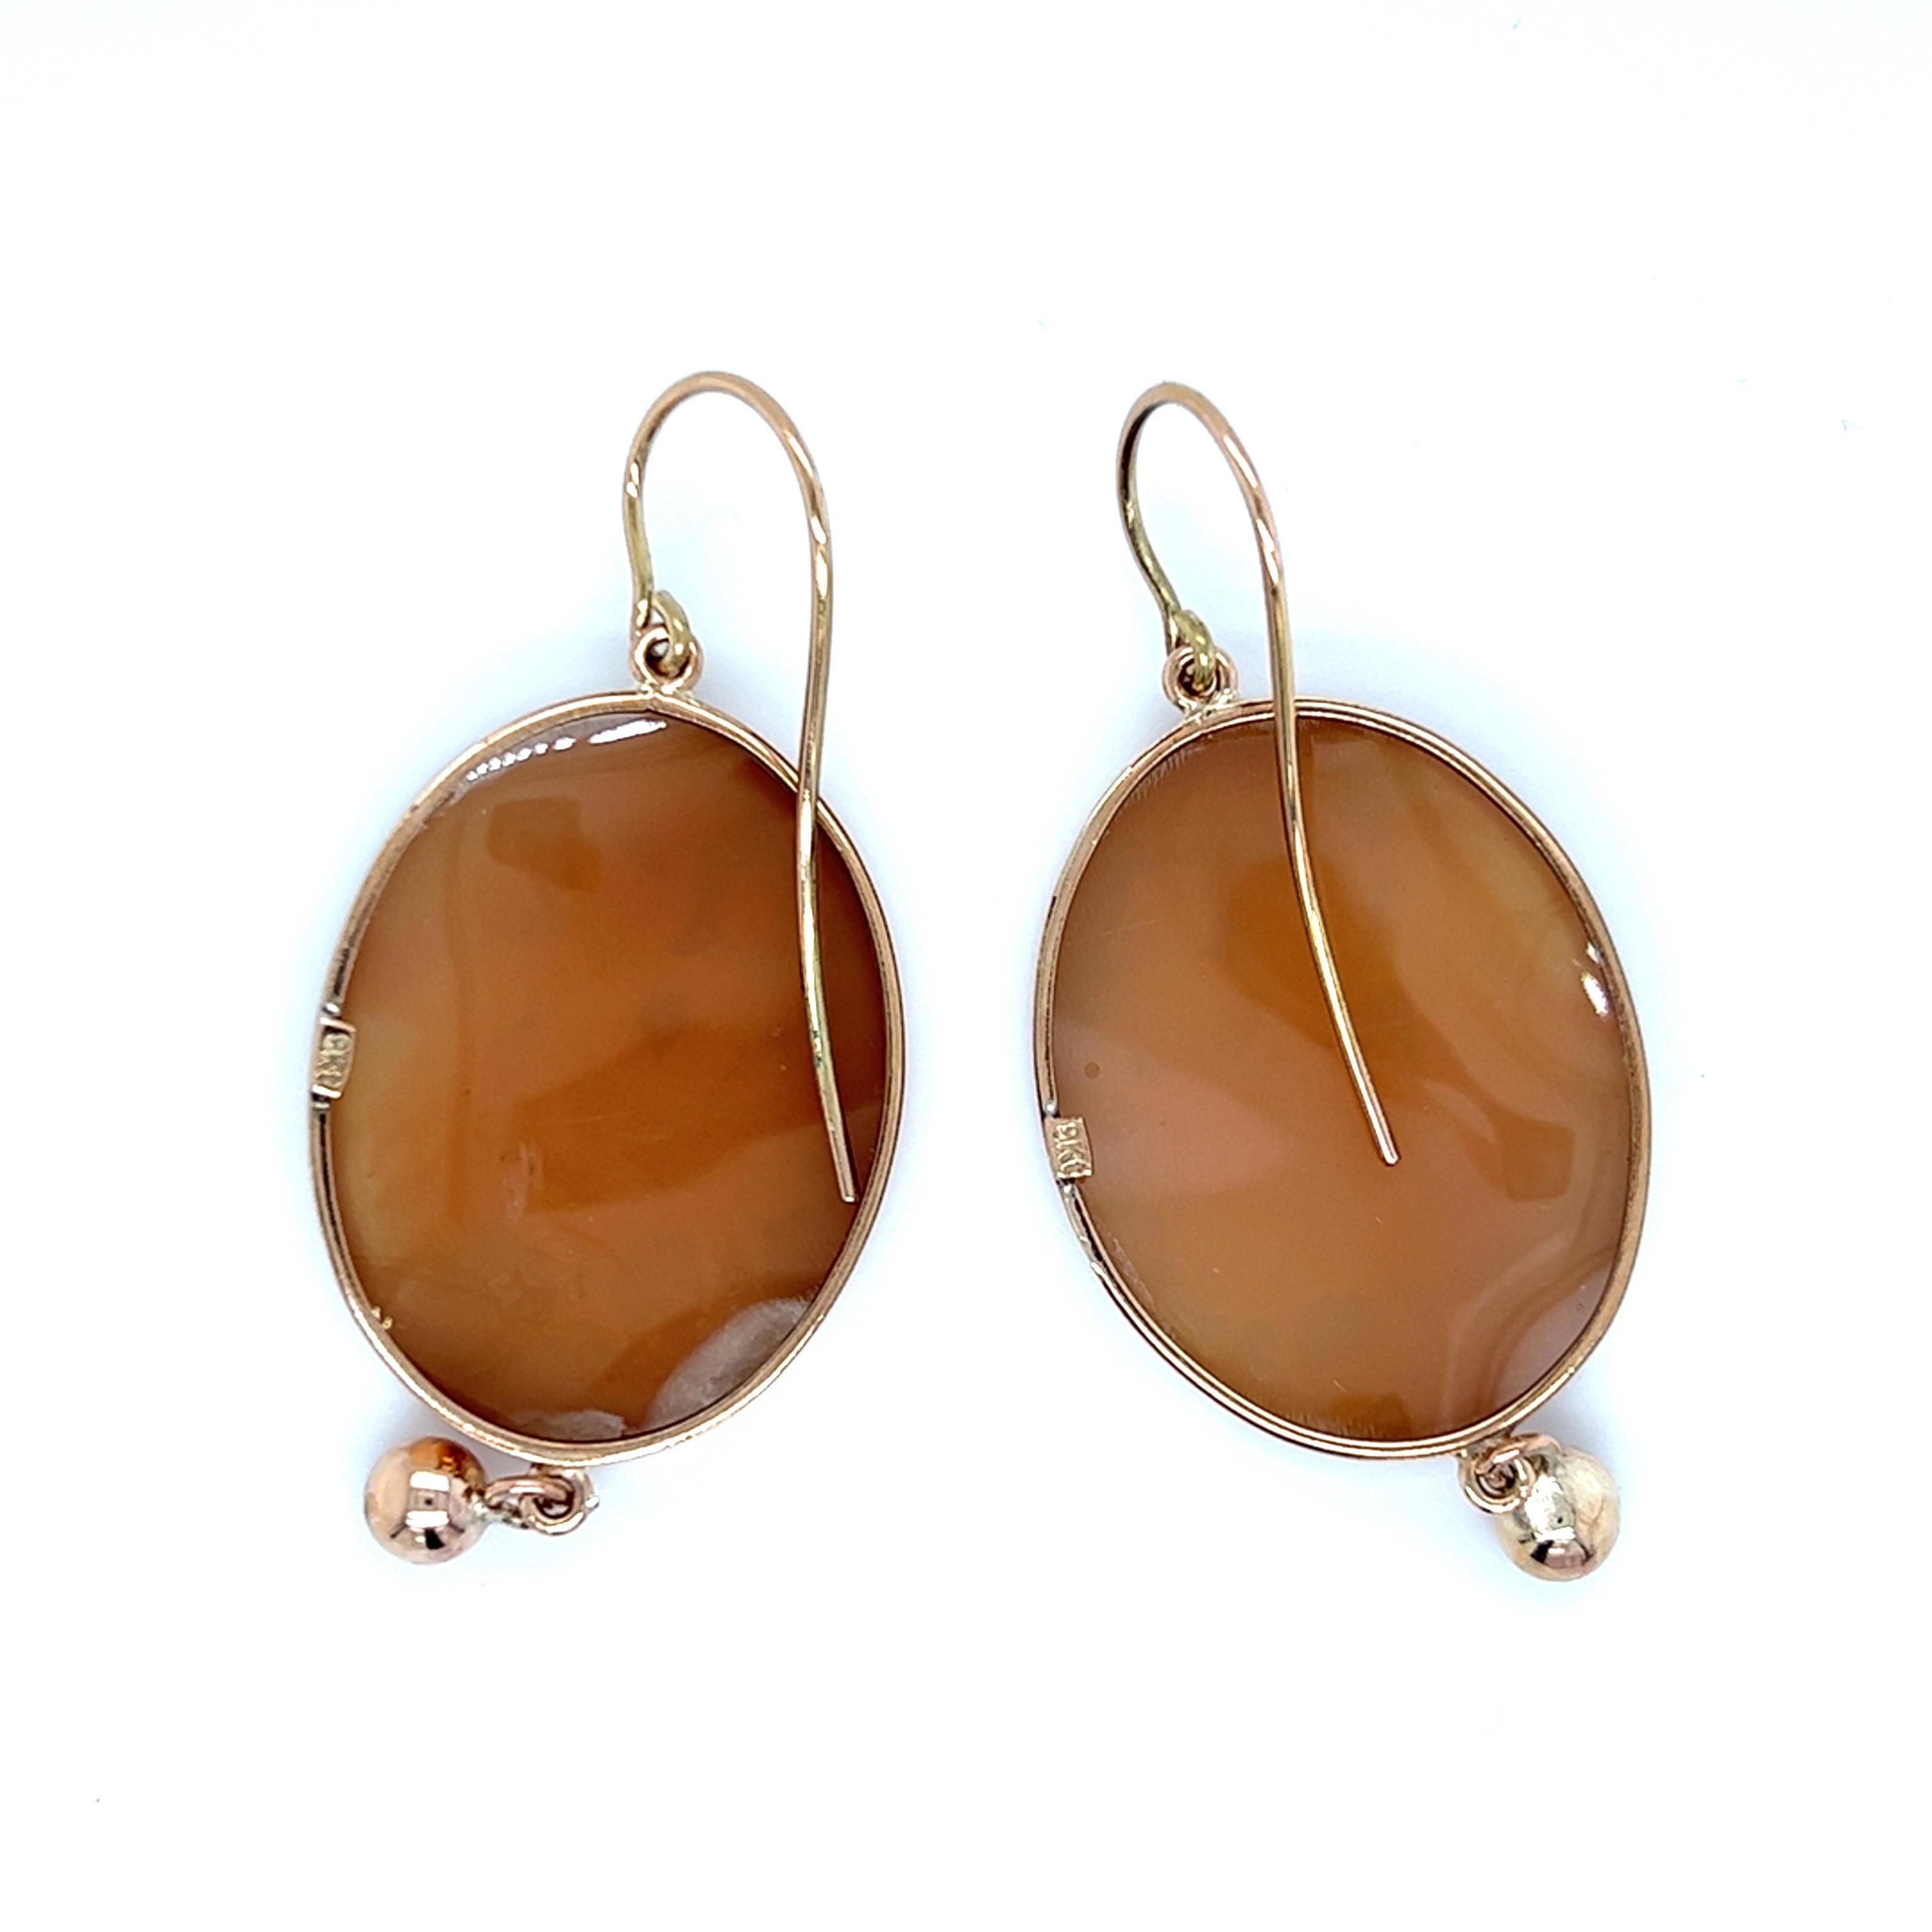 One pair of 9-karat rose gold shell cameo earrings featuring The Three Graces design.  The earrings measure just over two inches long, and one inch wide, and are complete with traditional hook closures.